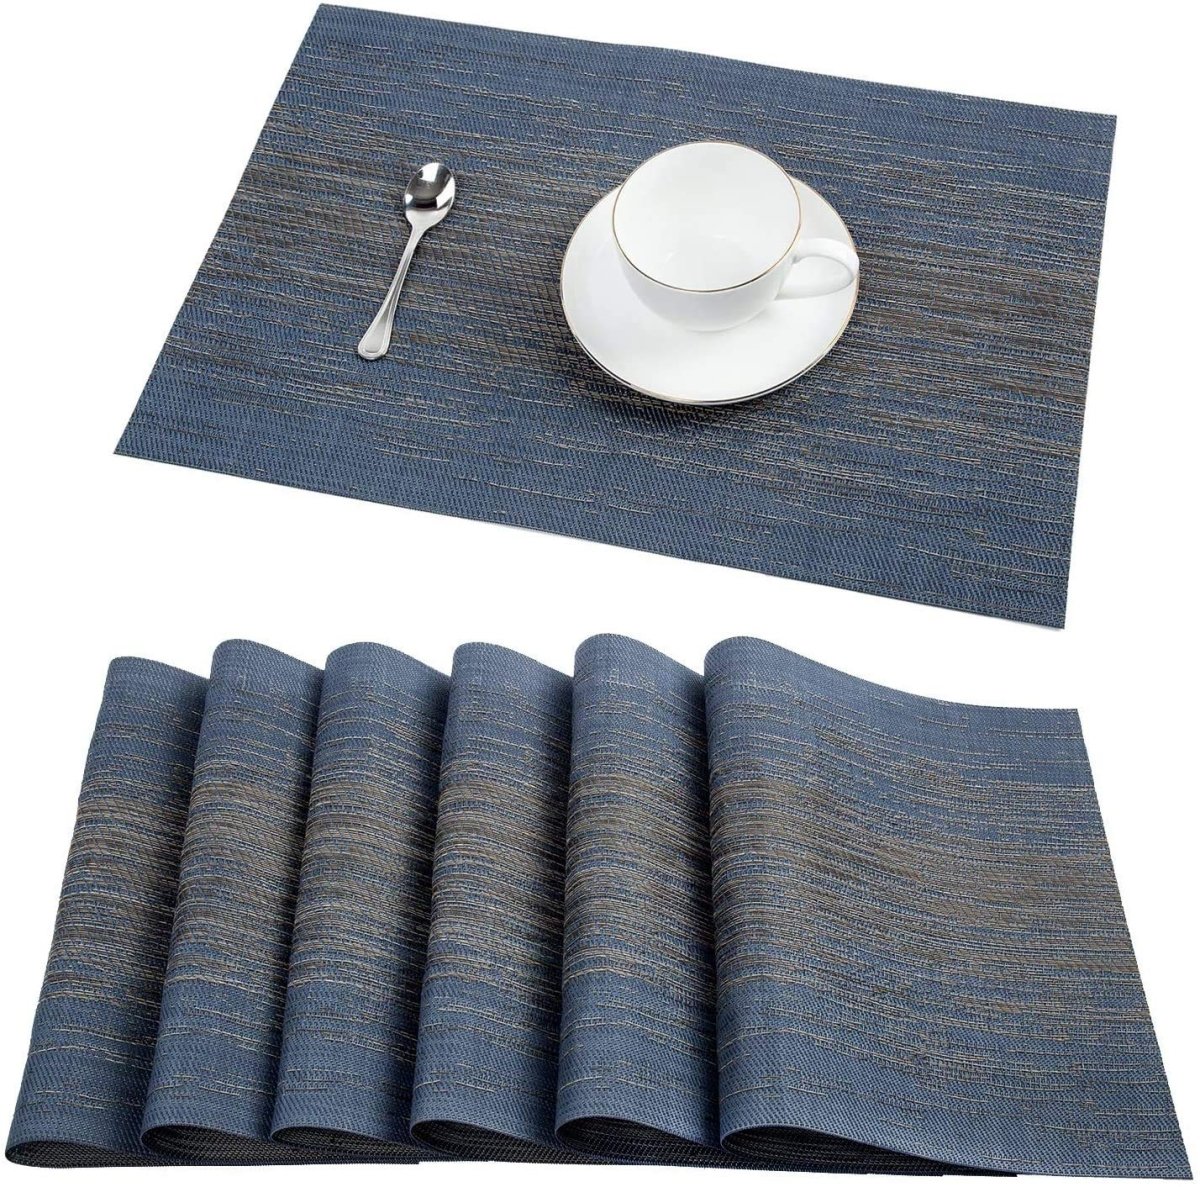 Dining Table Mat Easy to Clean-Washable Reversible Anti-Slip Placemats Dining Table Placemats- #Royalkart#best dining table placemats